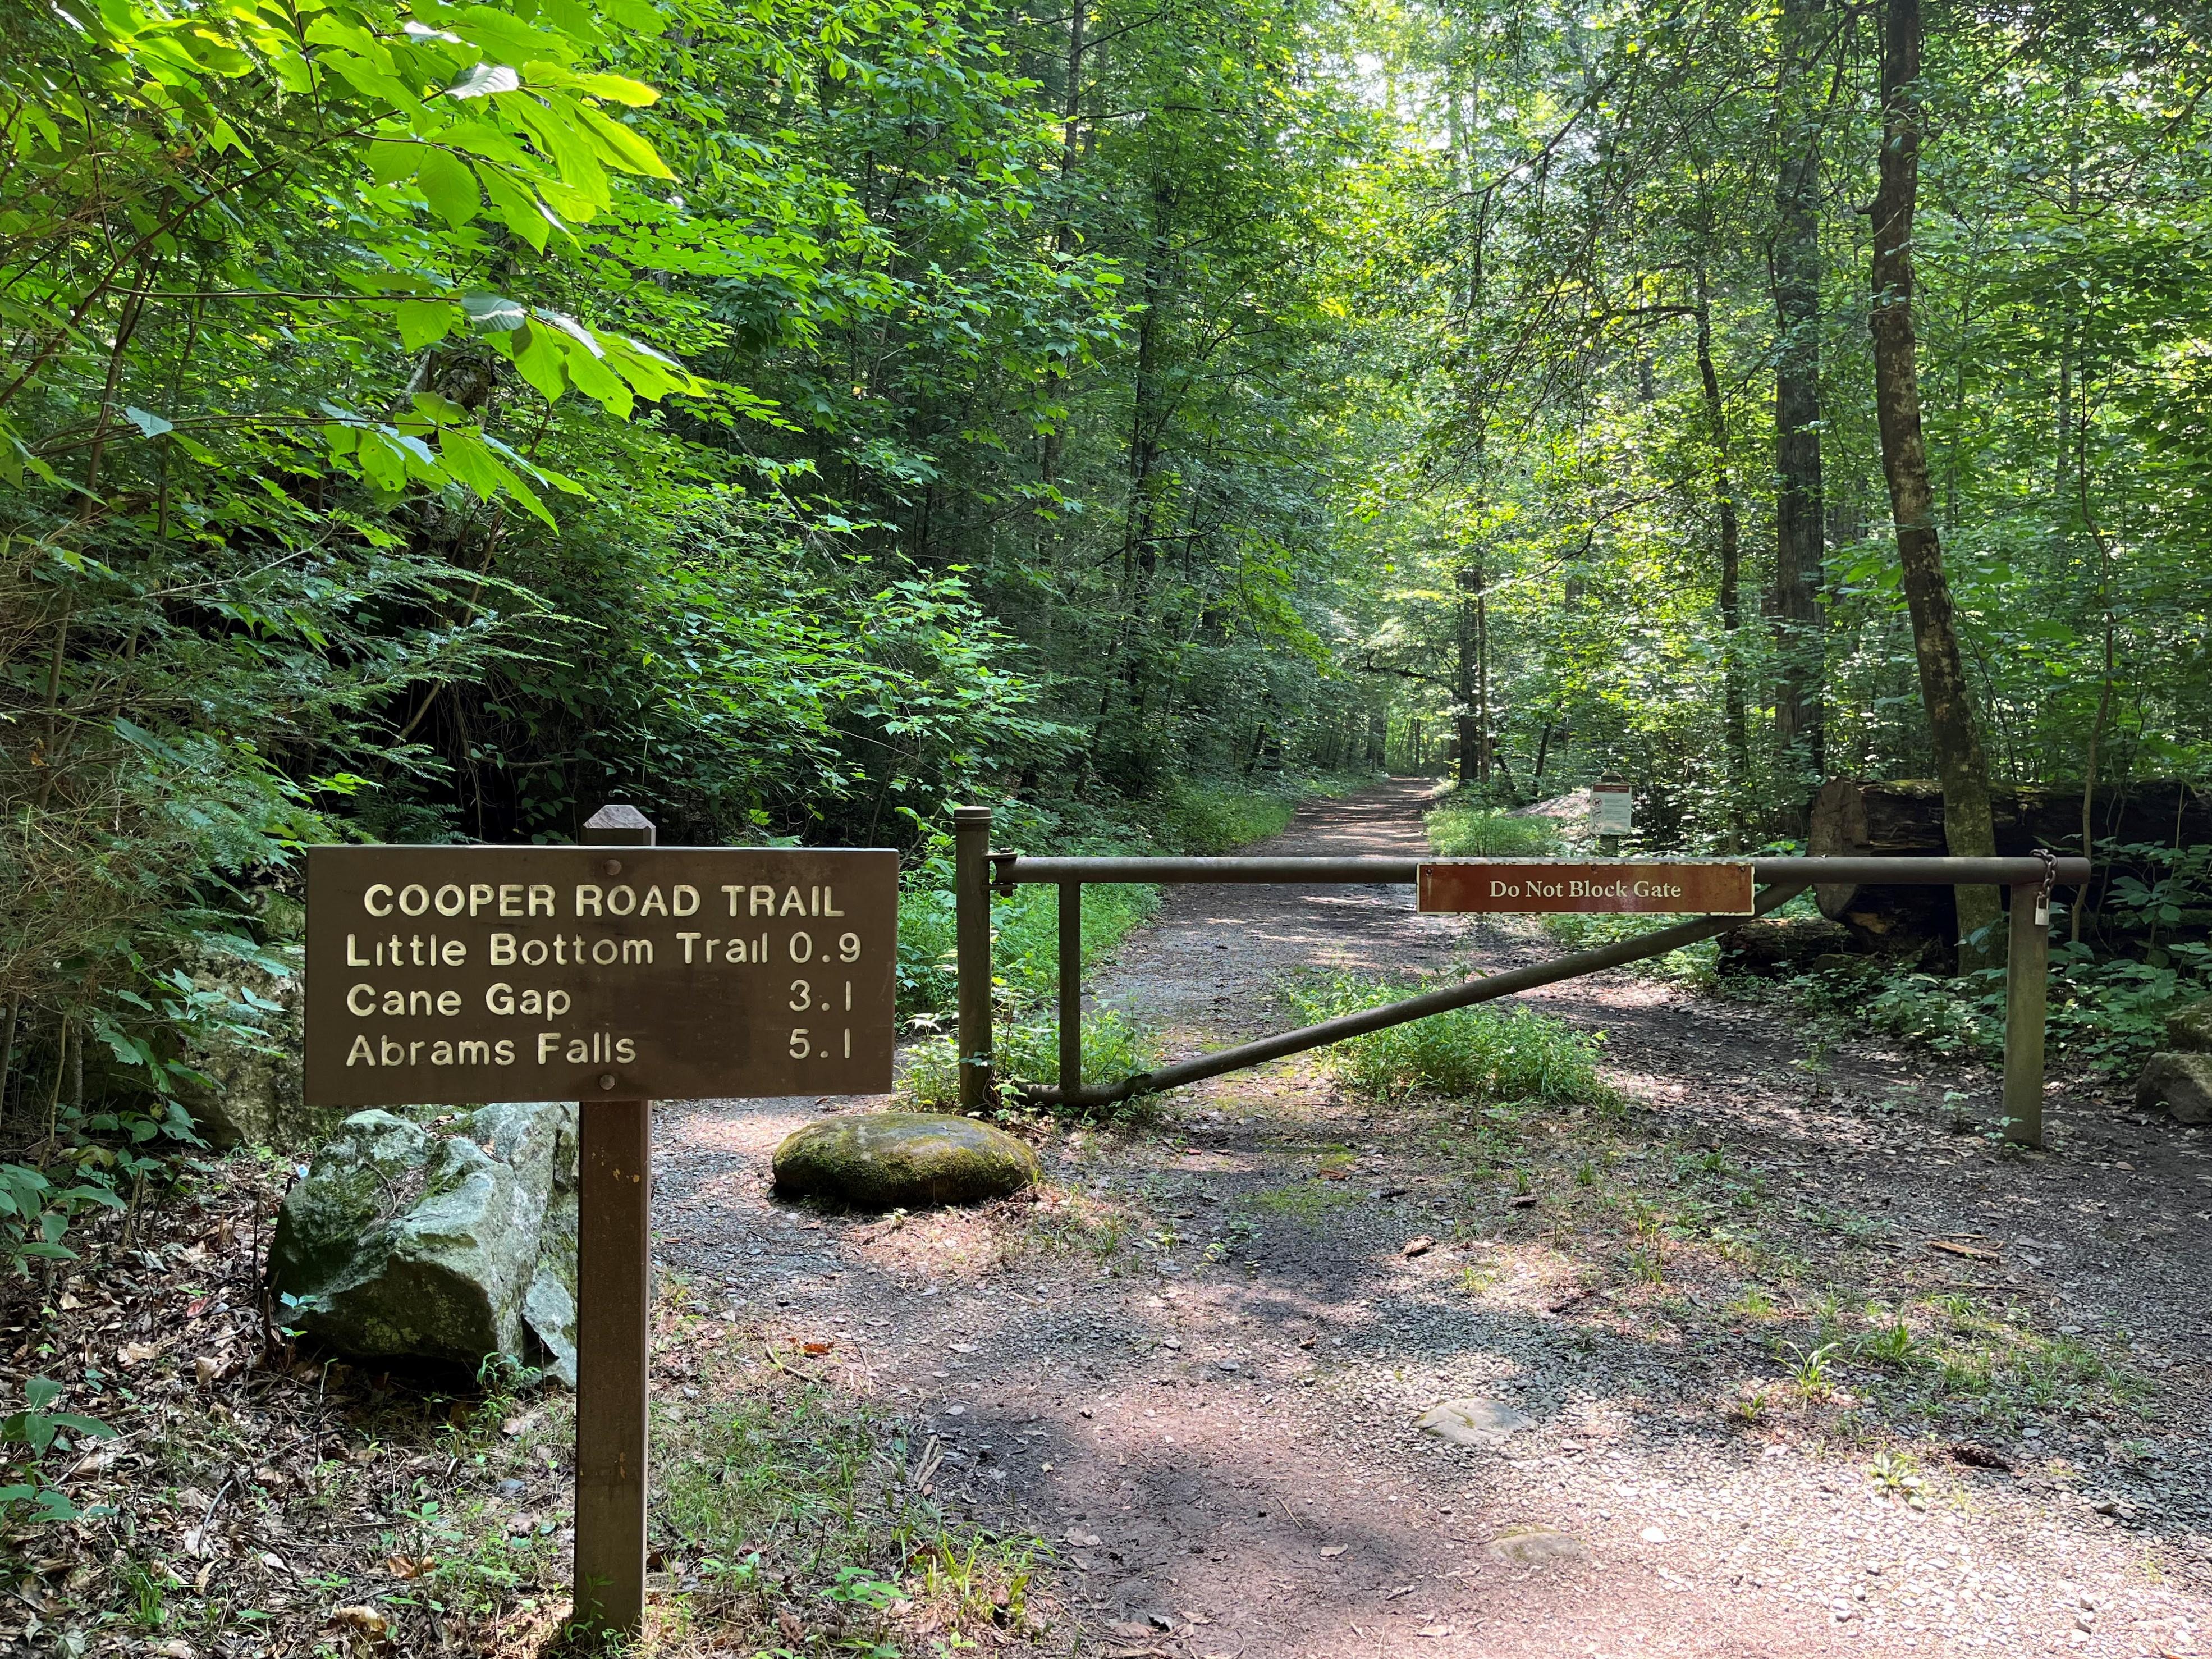 Brown sign that says, "Cooper Road Trail, Little Bottom Trail 0.9, Cane Gap 3.1, Abrams Falls 5.1".